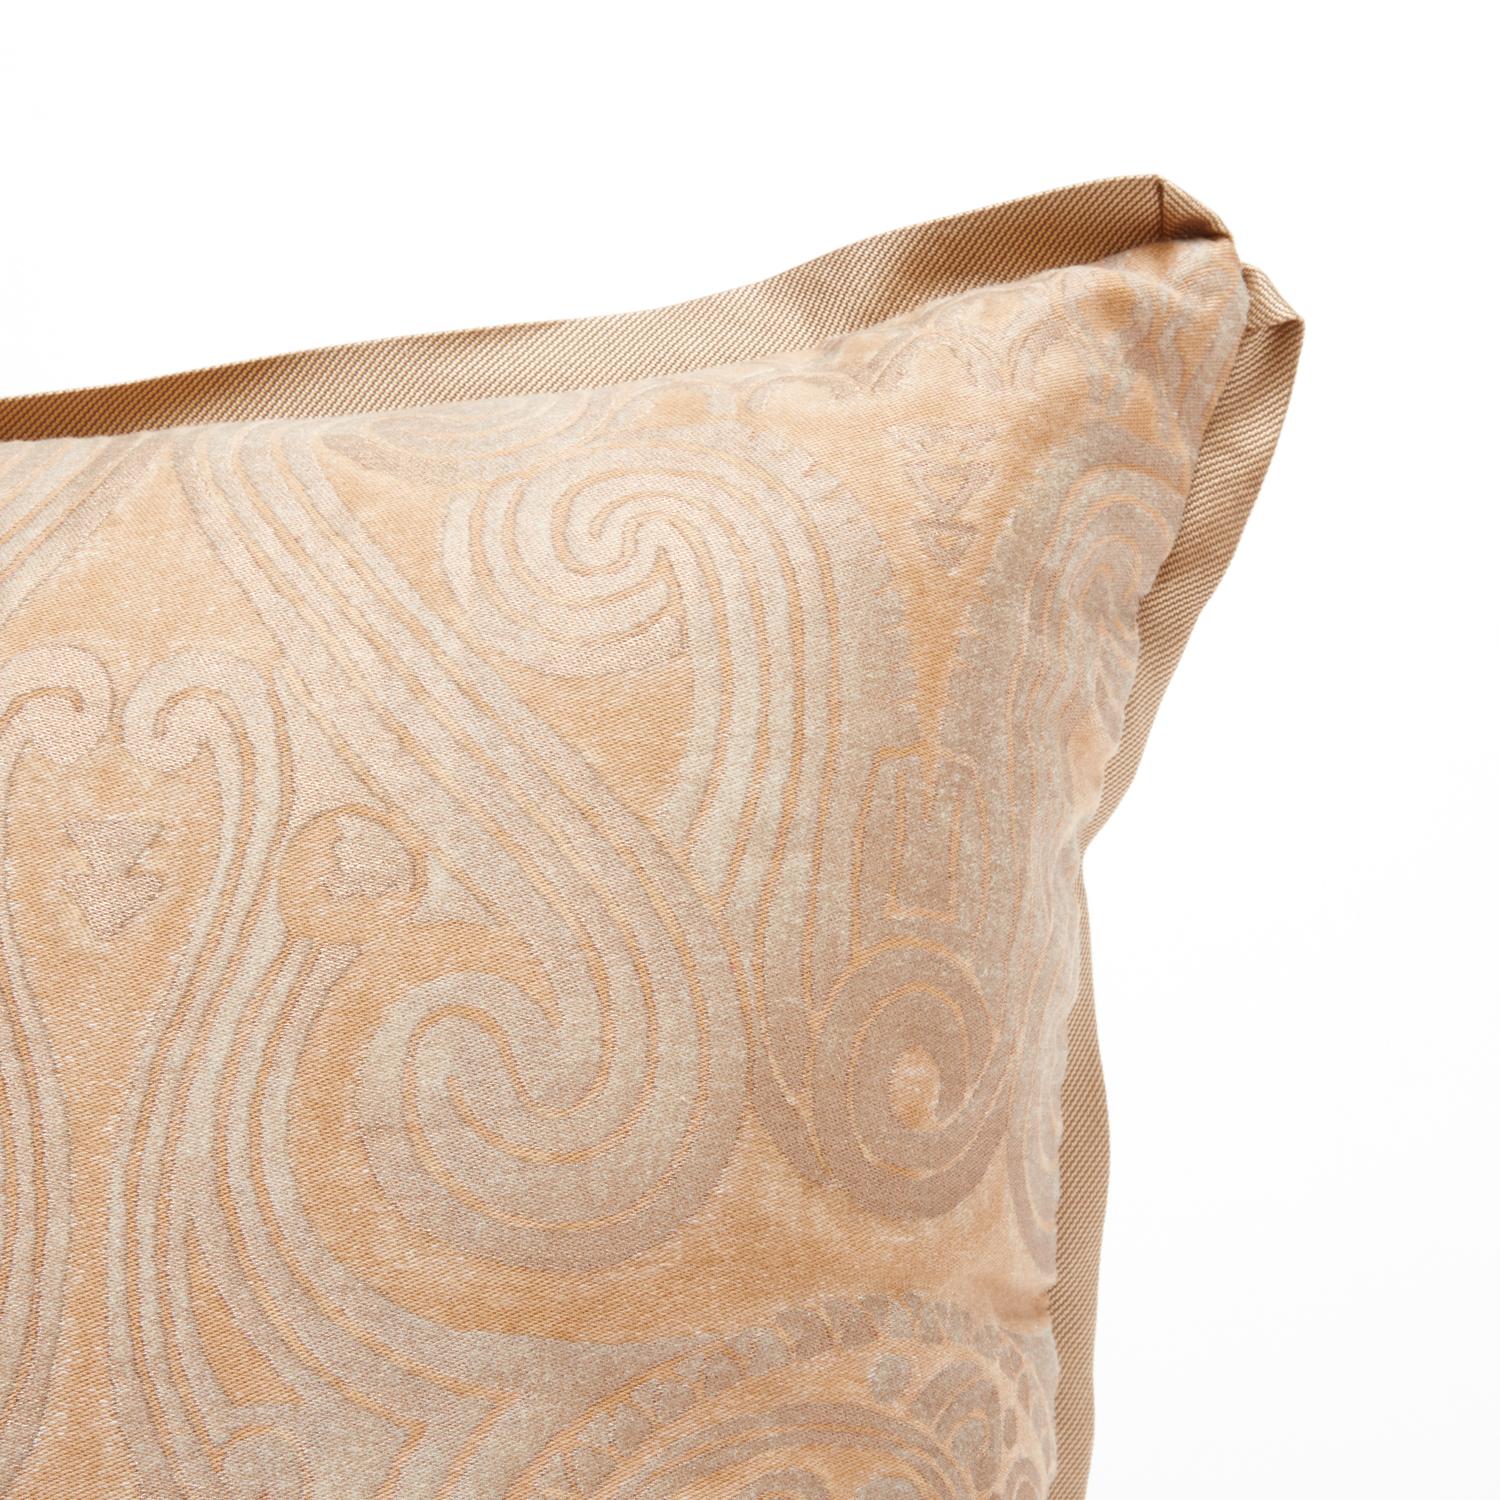 Pair of Fortuny Fabric Cushions in the Peruviano Pattern In New Condition For Sale In New York, NY